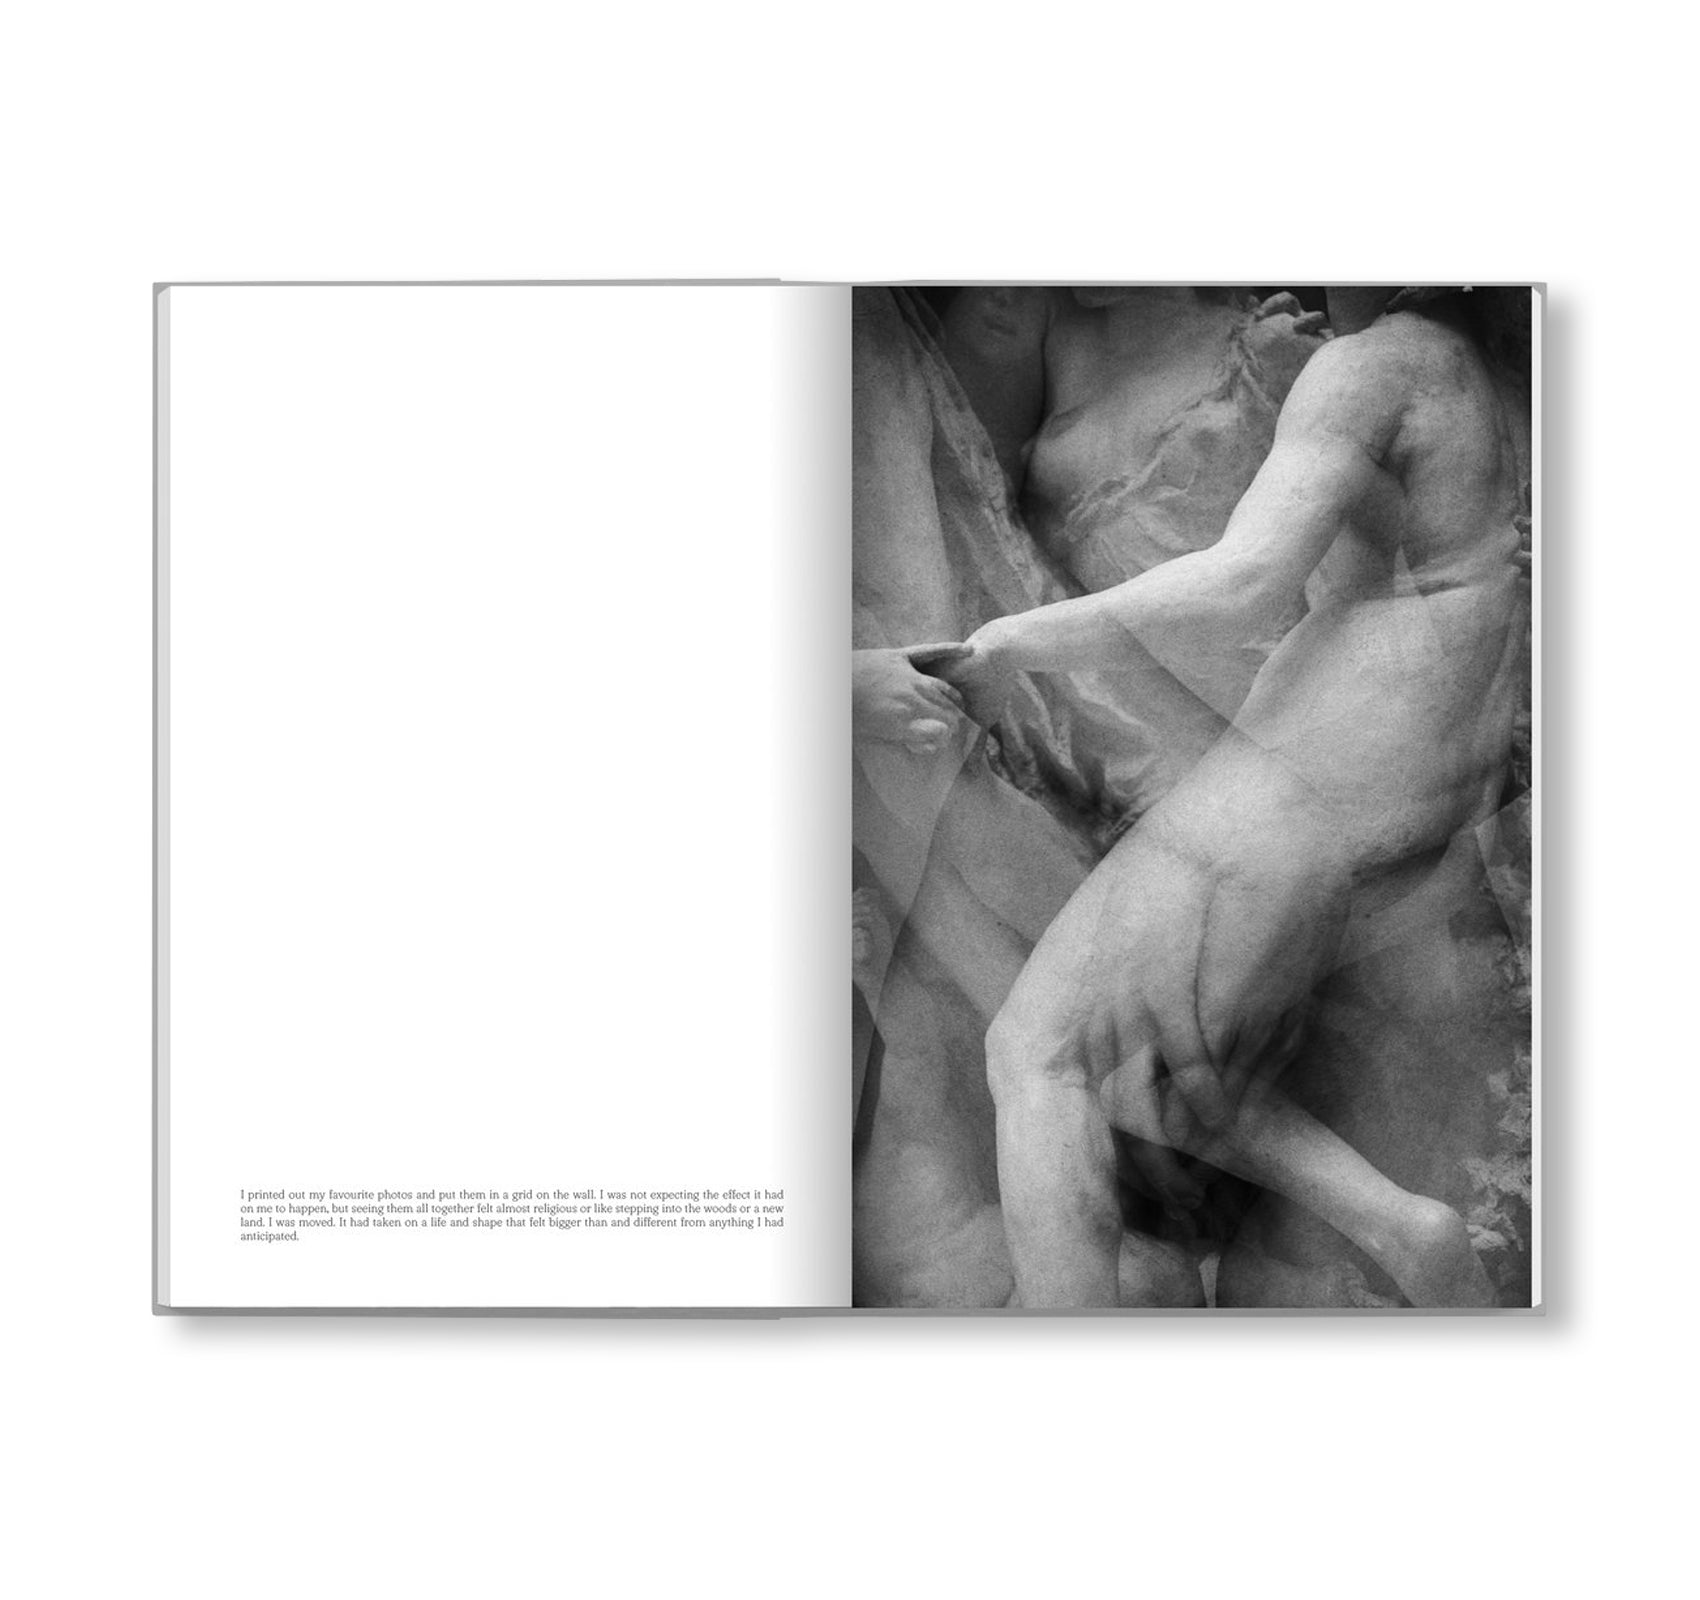 TOUCHING by Lina Scheynius [SPECIAL EDITION]